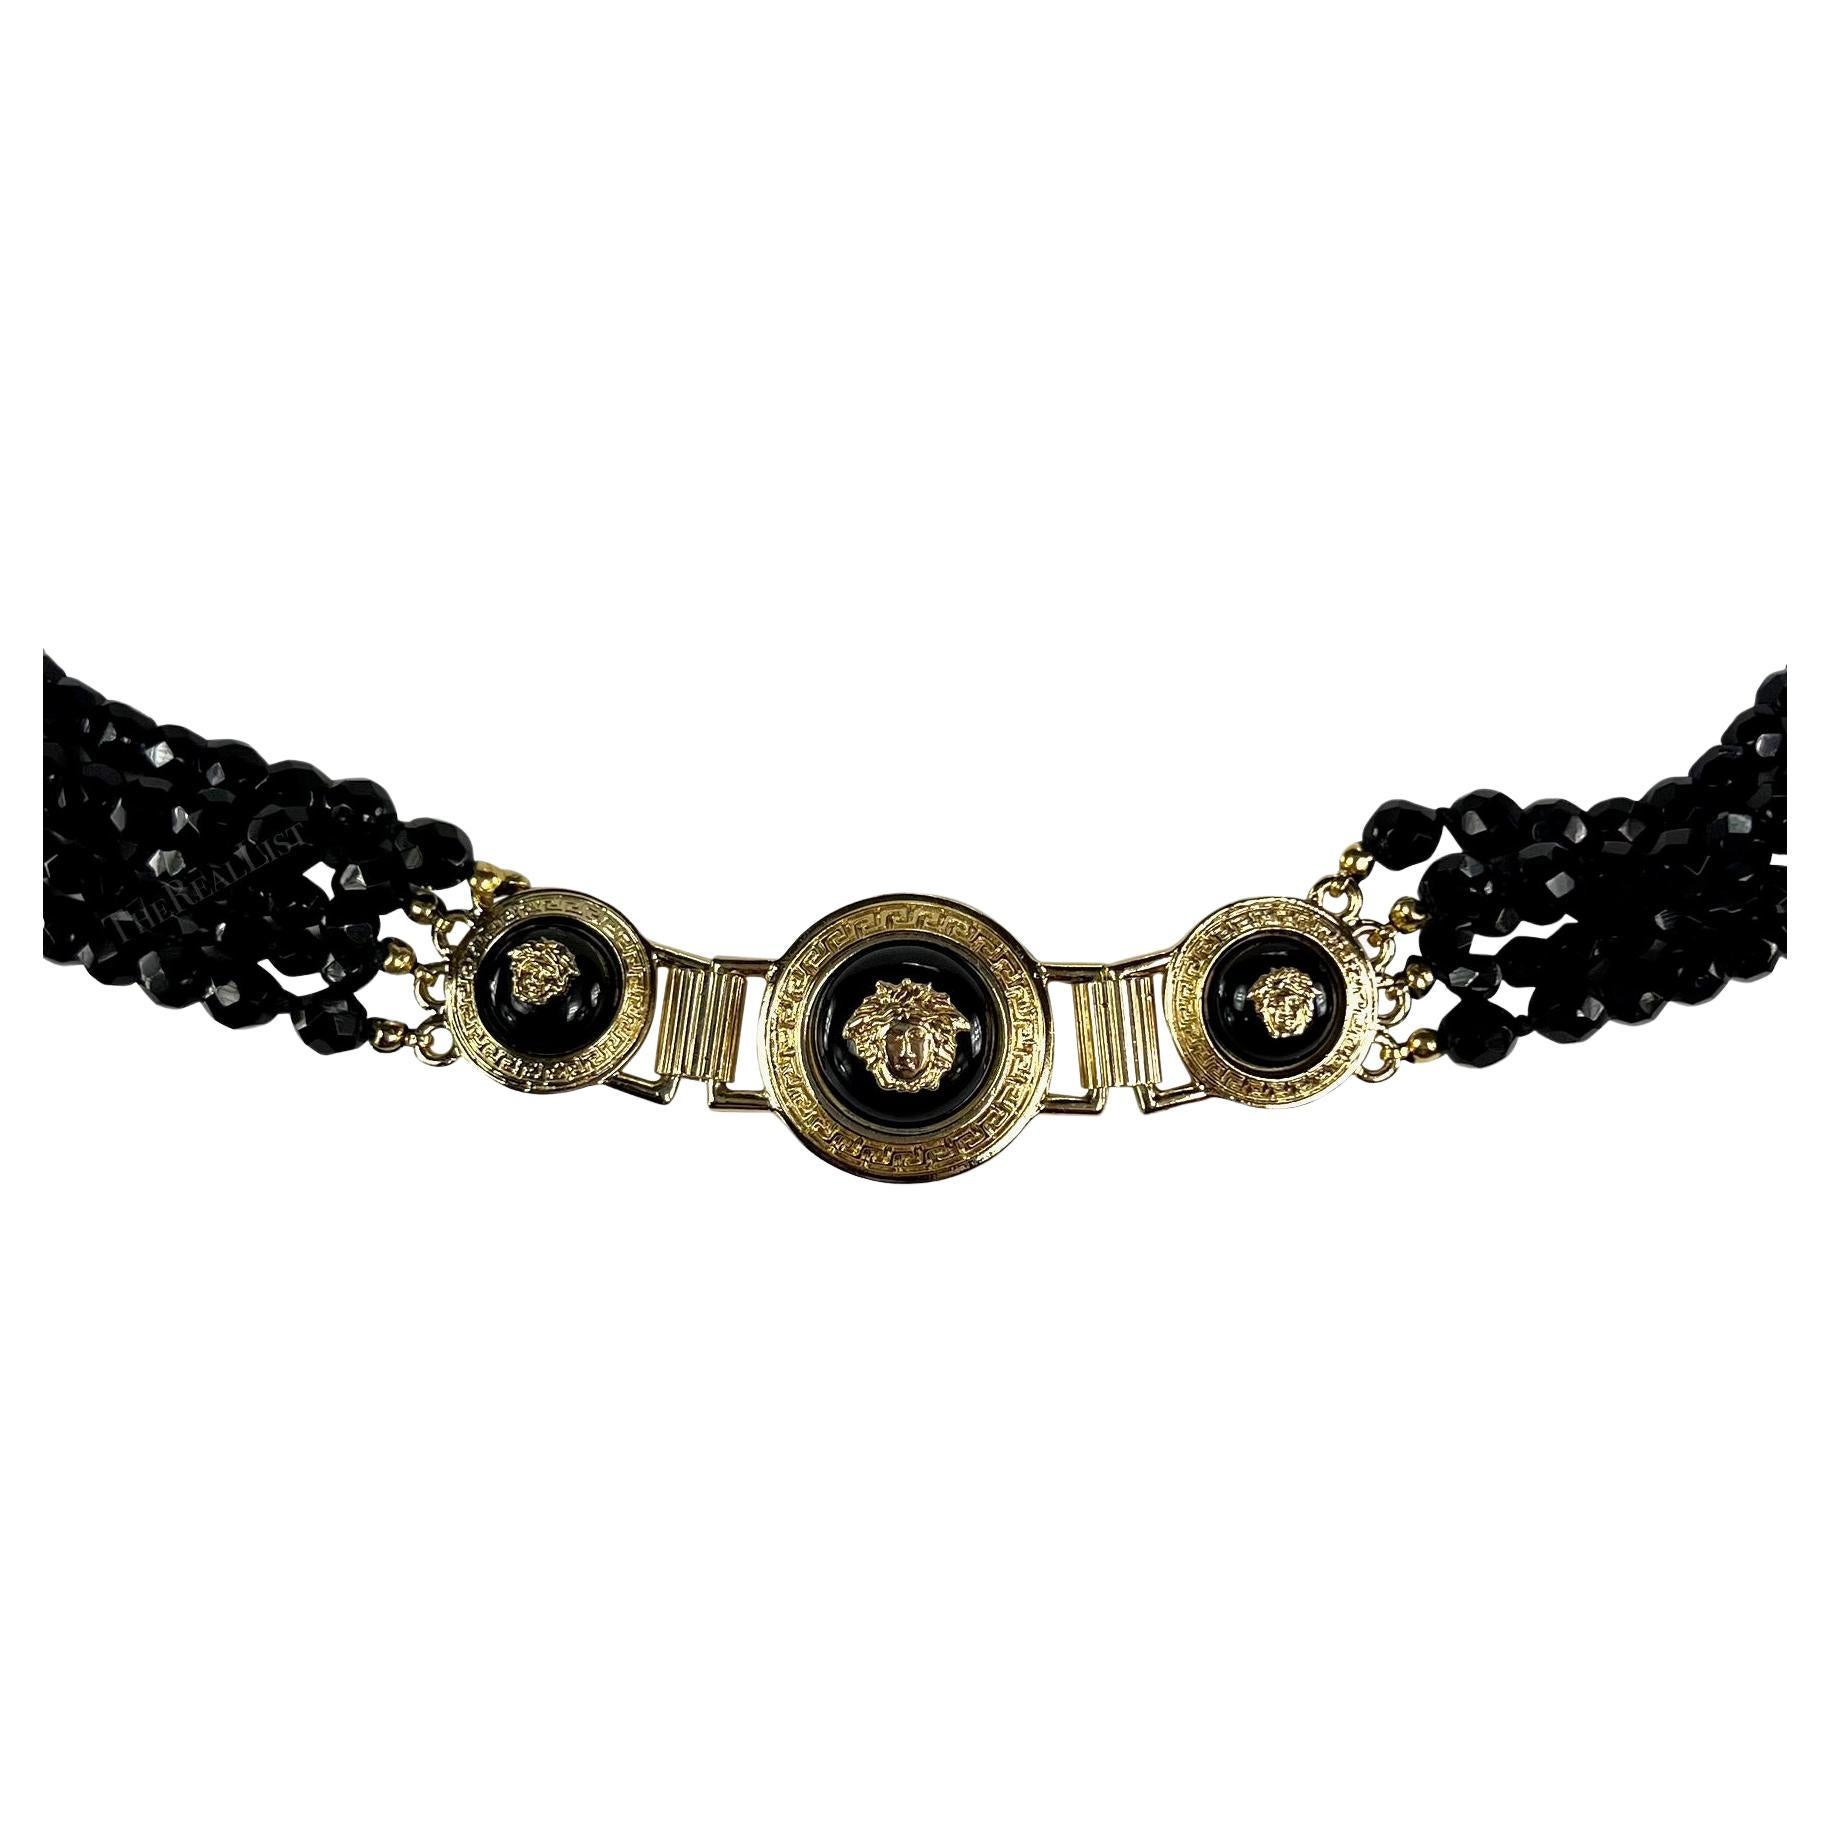 F/W 1994 Gianni Versace Runway Medusa Black Beaded Patent Leather Belt In Excellent Condition For Sale In West Hollywood, CA